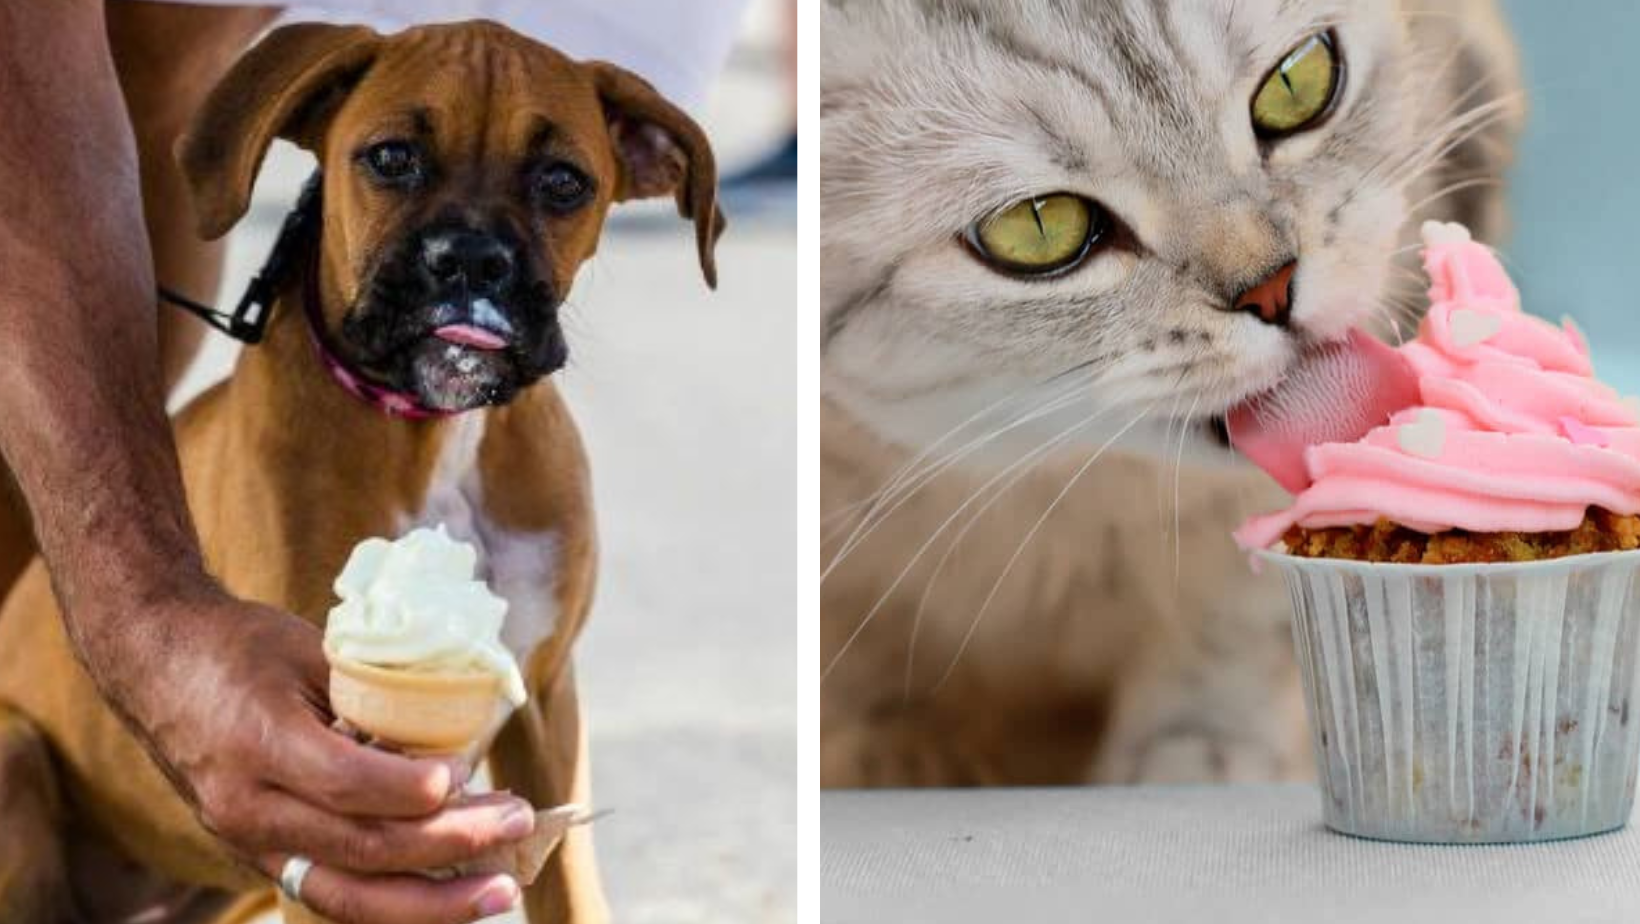 Why Should We Avoid Feeding Sweets to Our Pets?